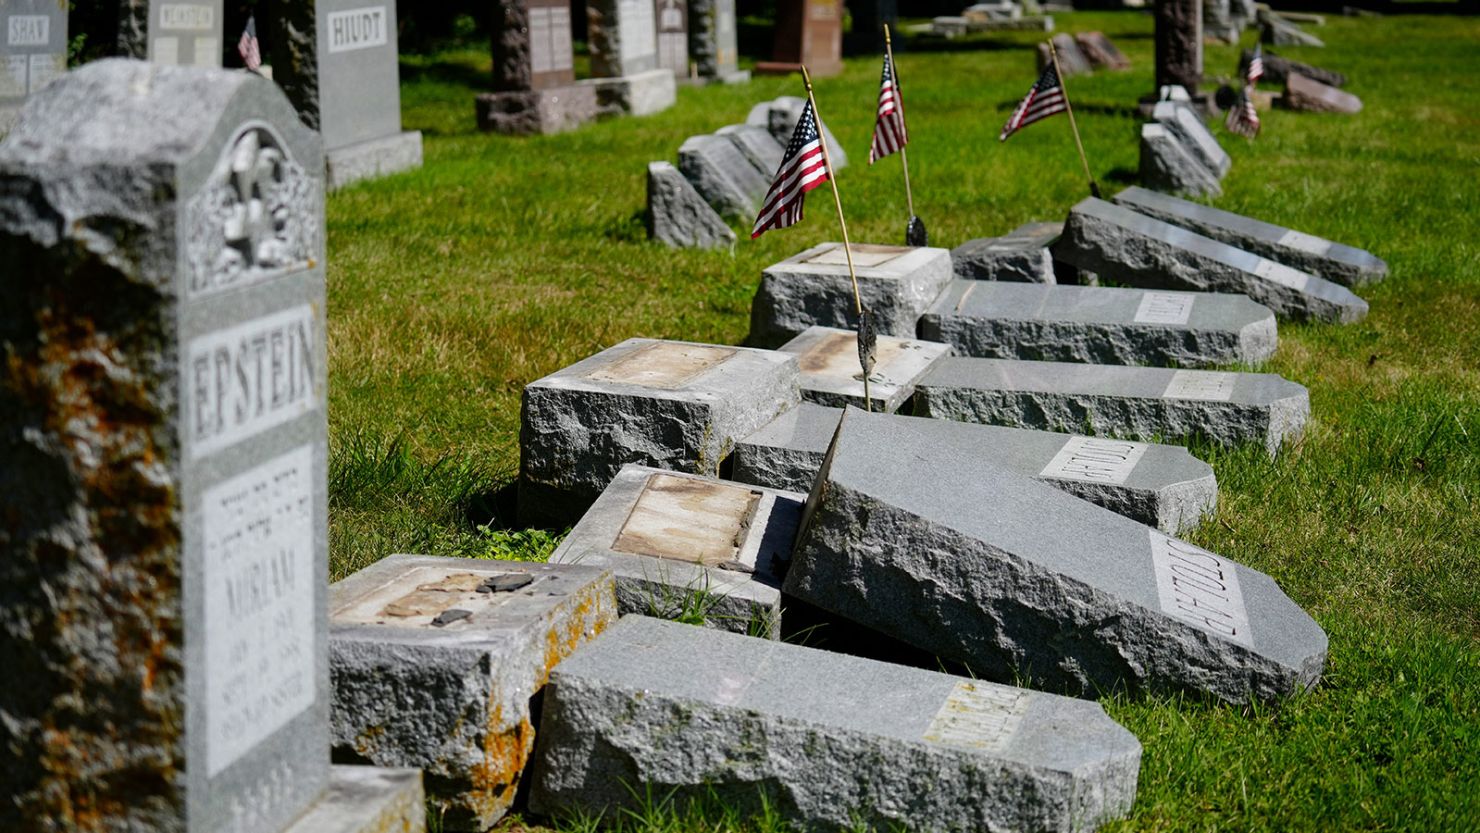 Many of the 176 gravestones that were vandalized at the cemeteries had American flags, signifying a veteran.